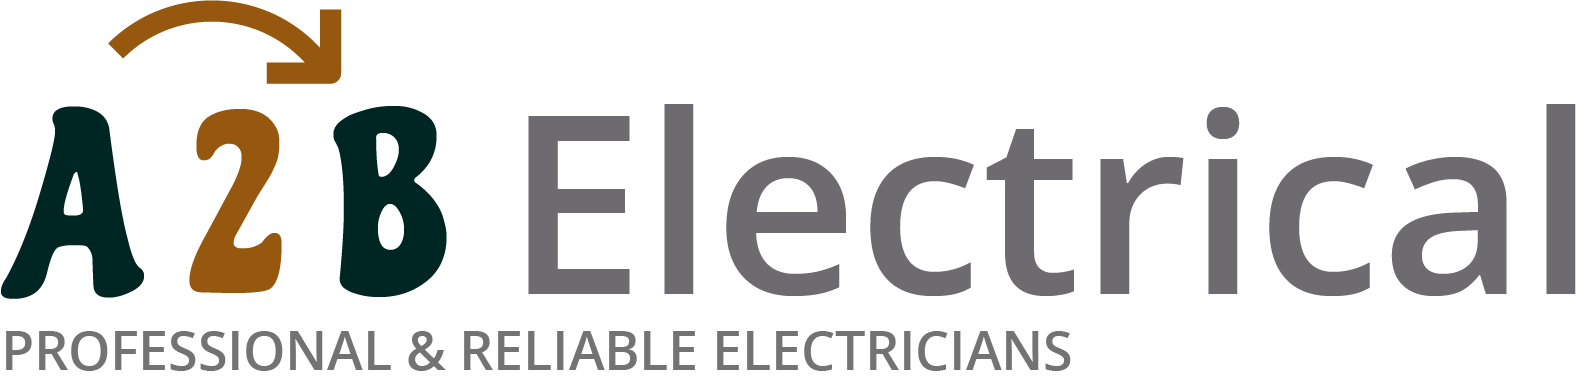 If you have electrical wiring problems in Aveley, we can provide an electrician to have a look for you. 